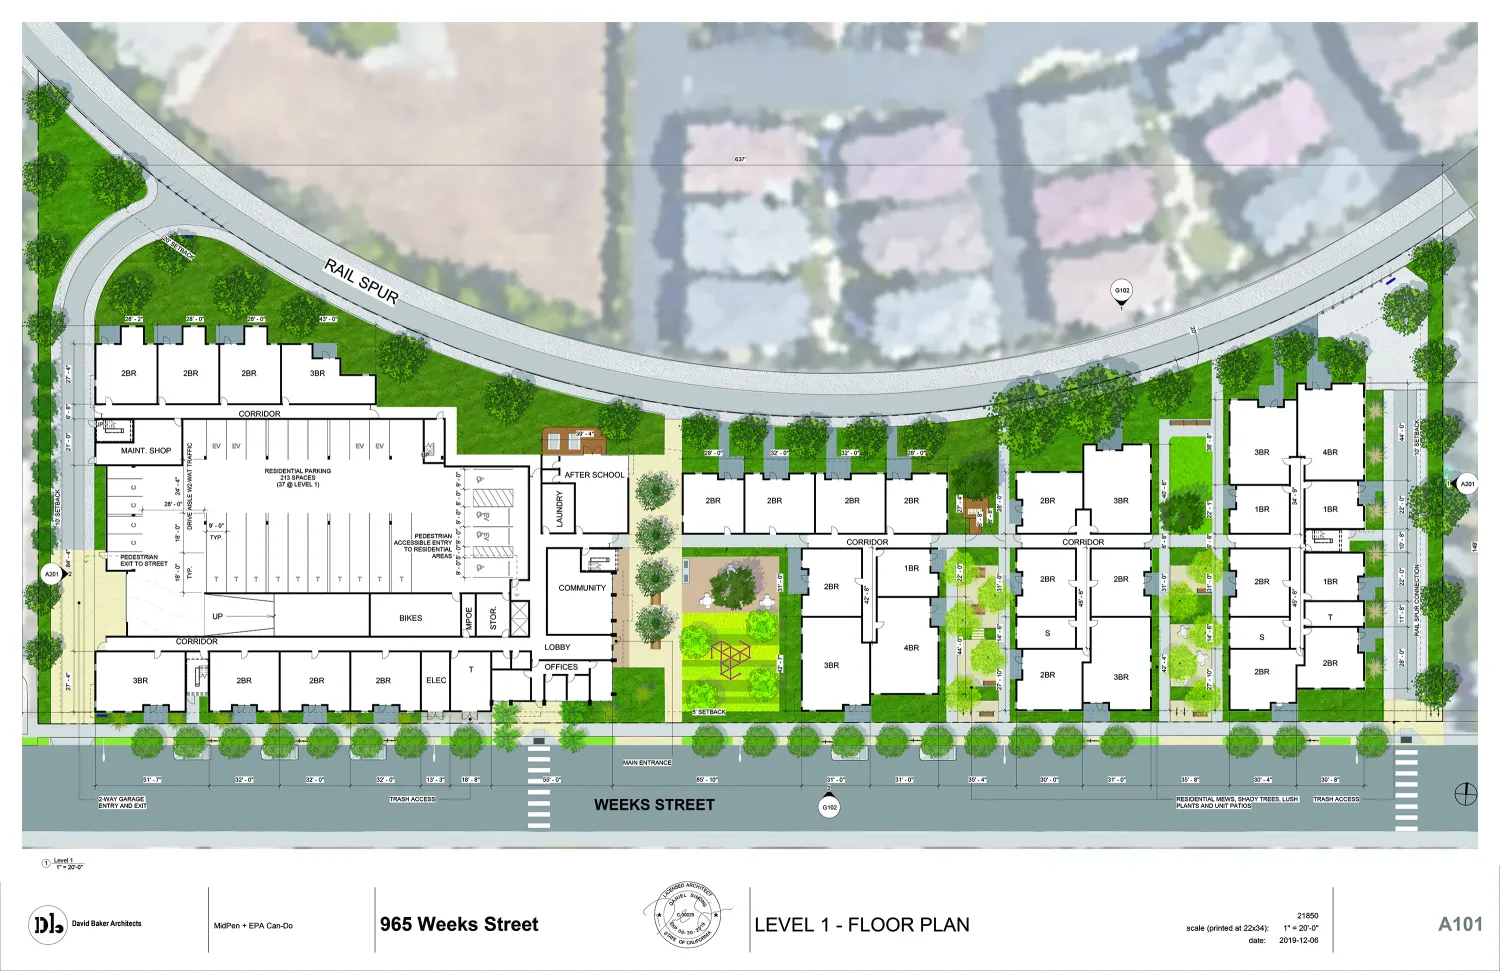 Level 1 site plan for Colibrí Commons in East Palo Alto, California.